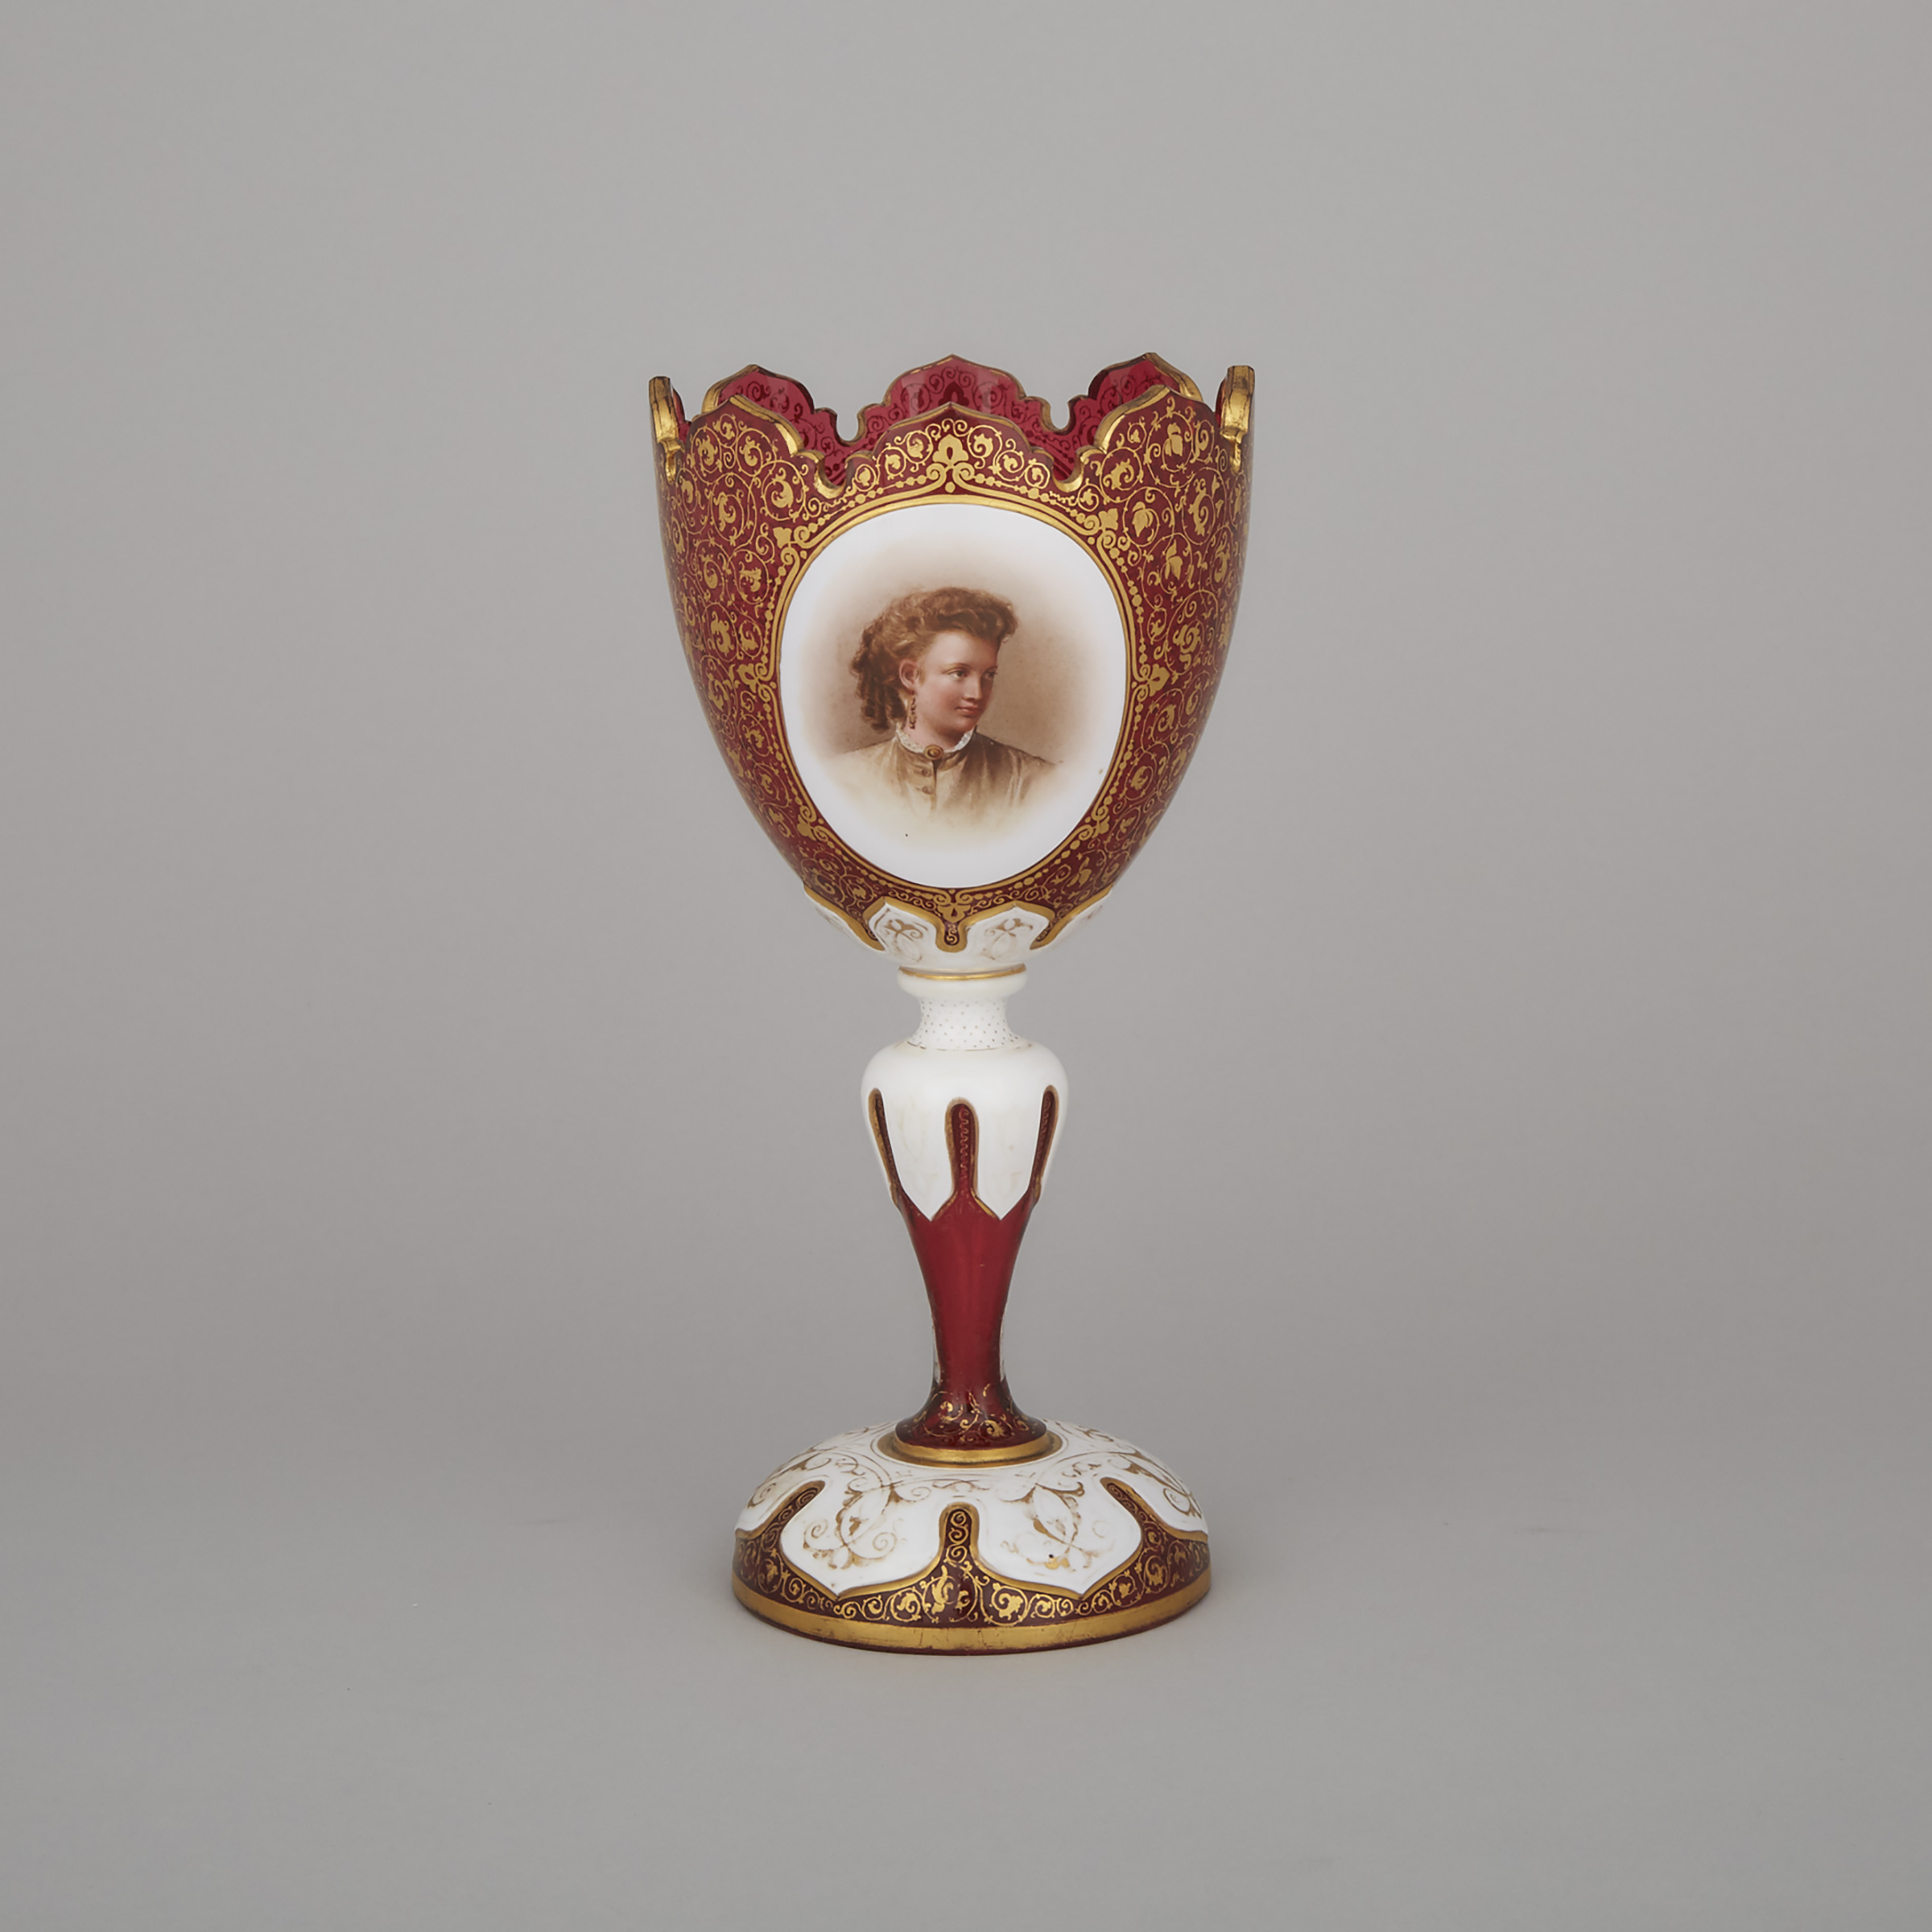 Bohemian Overlaid, Enameled and Gilt Red Glass Portrait Vase, late 19th century